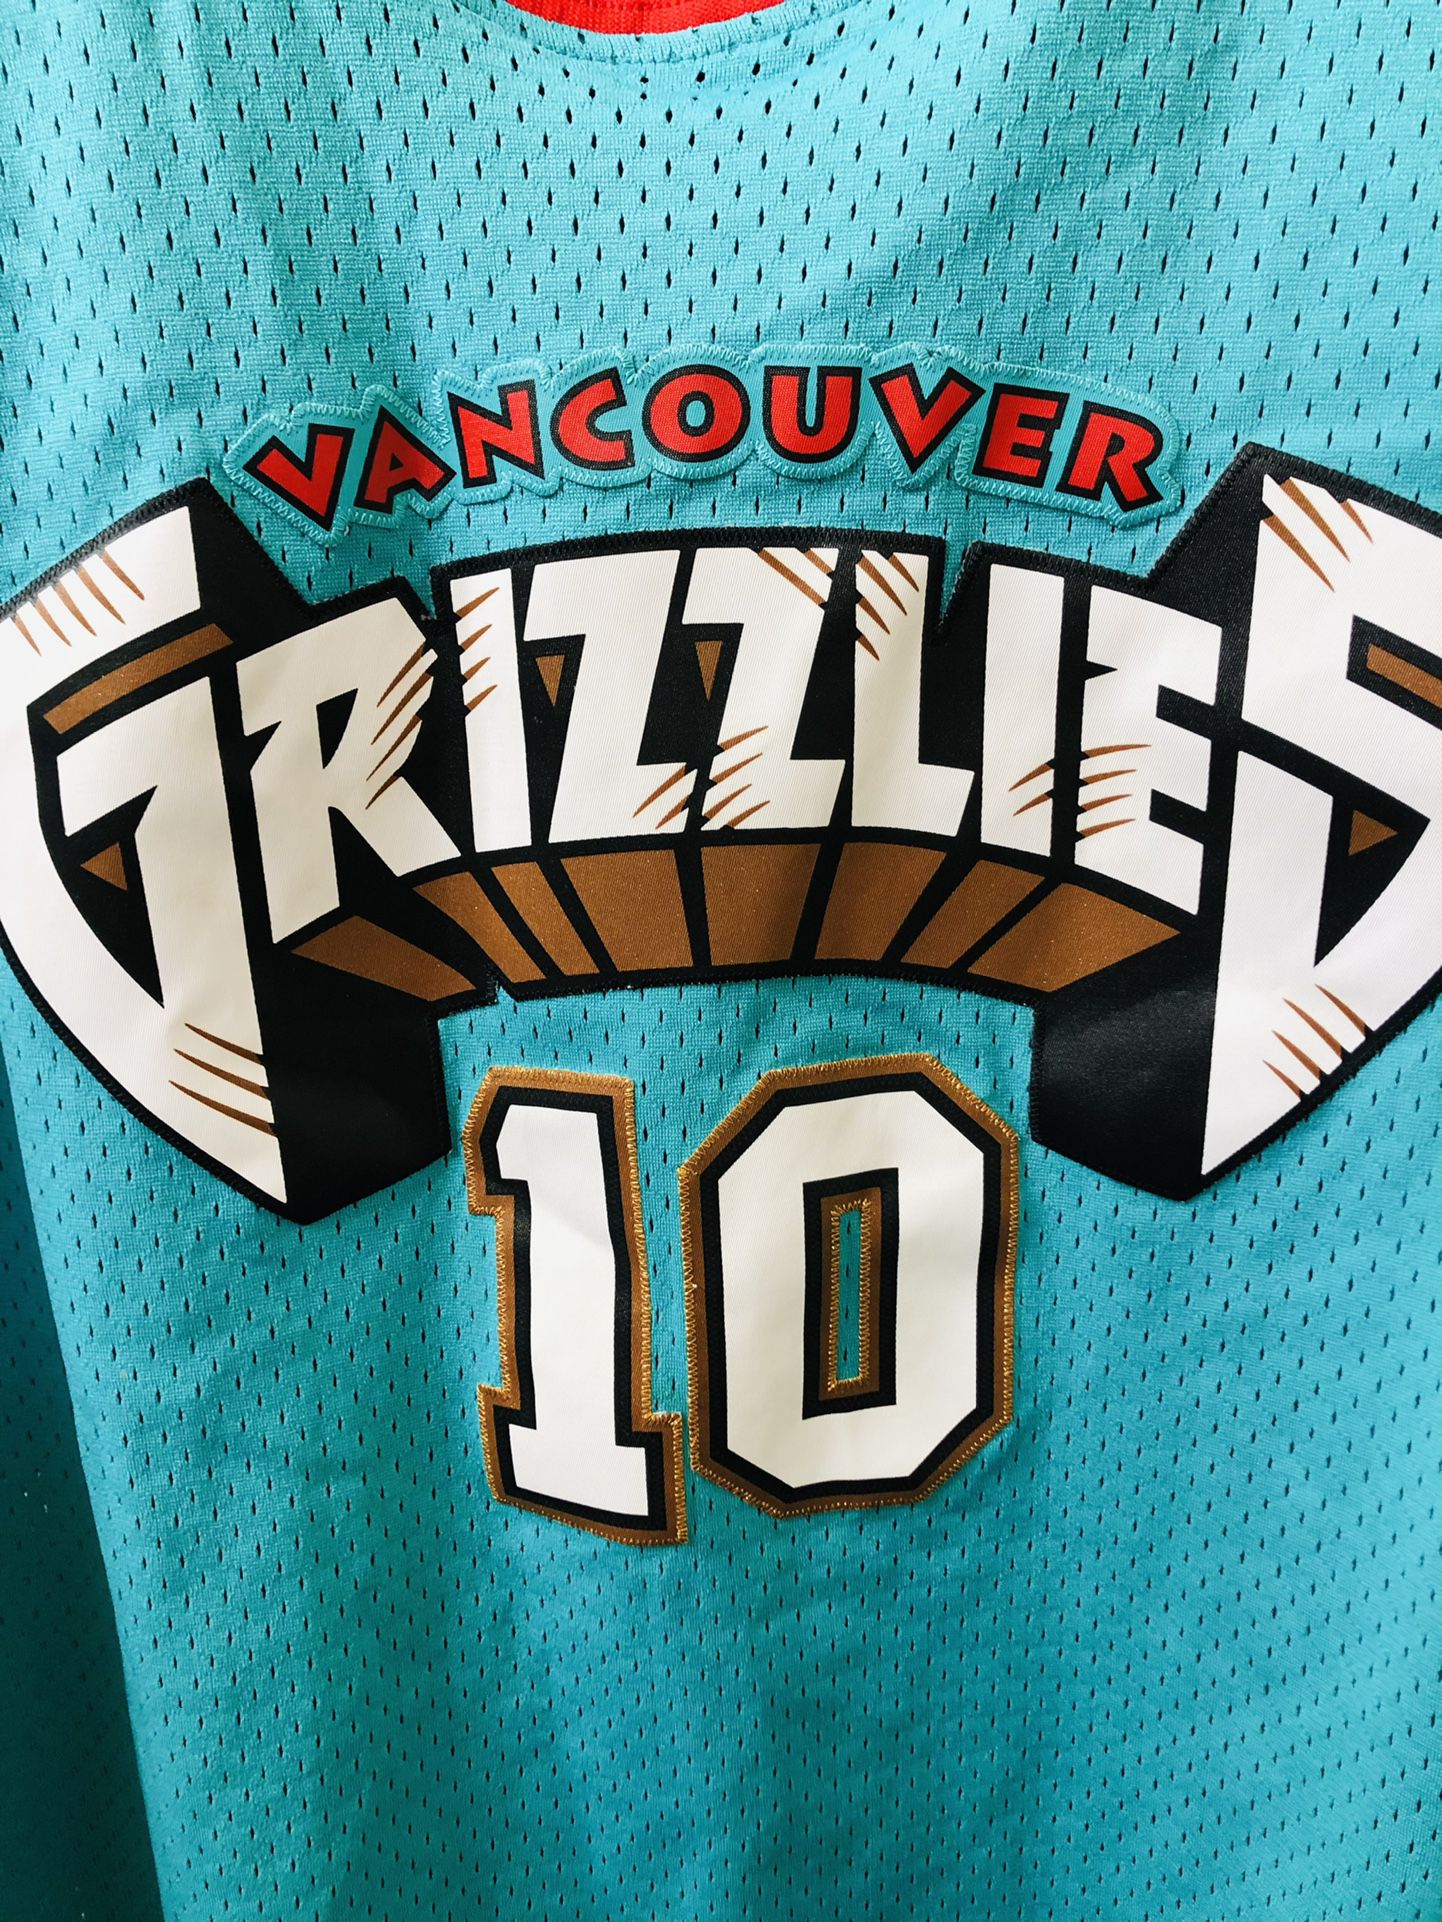 Mike Bibby #10 Vancouver Grizzlies Throwback Jersey for Sale in